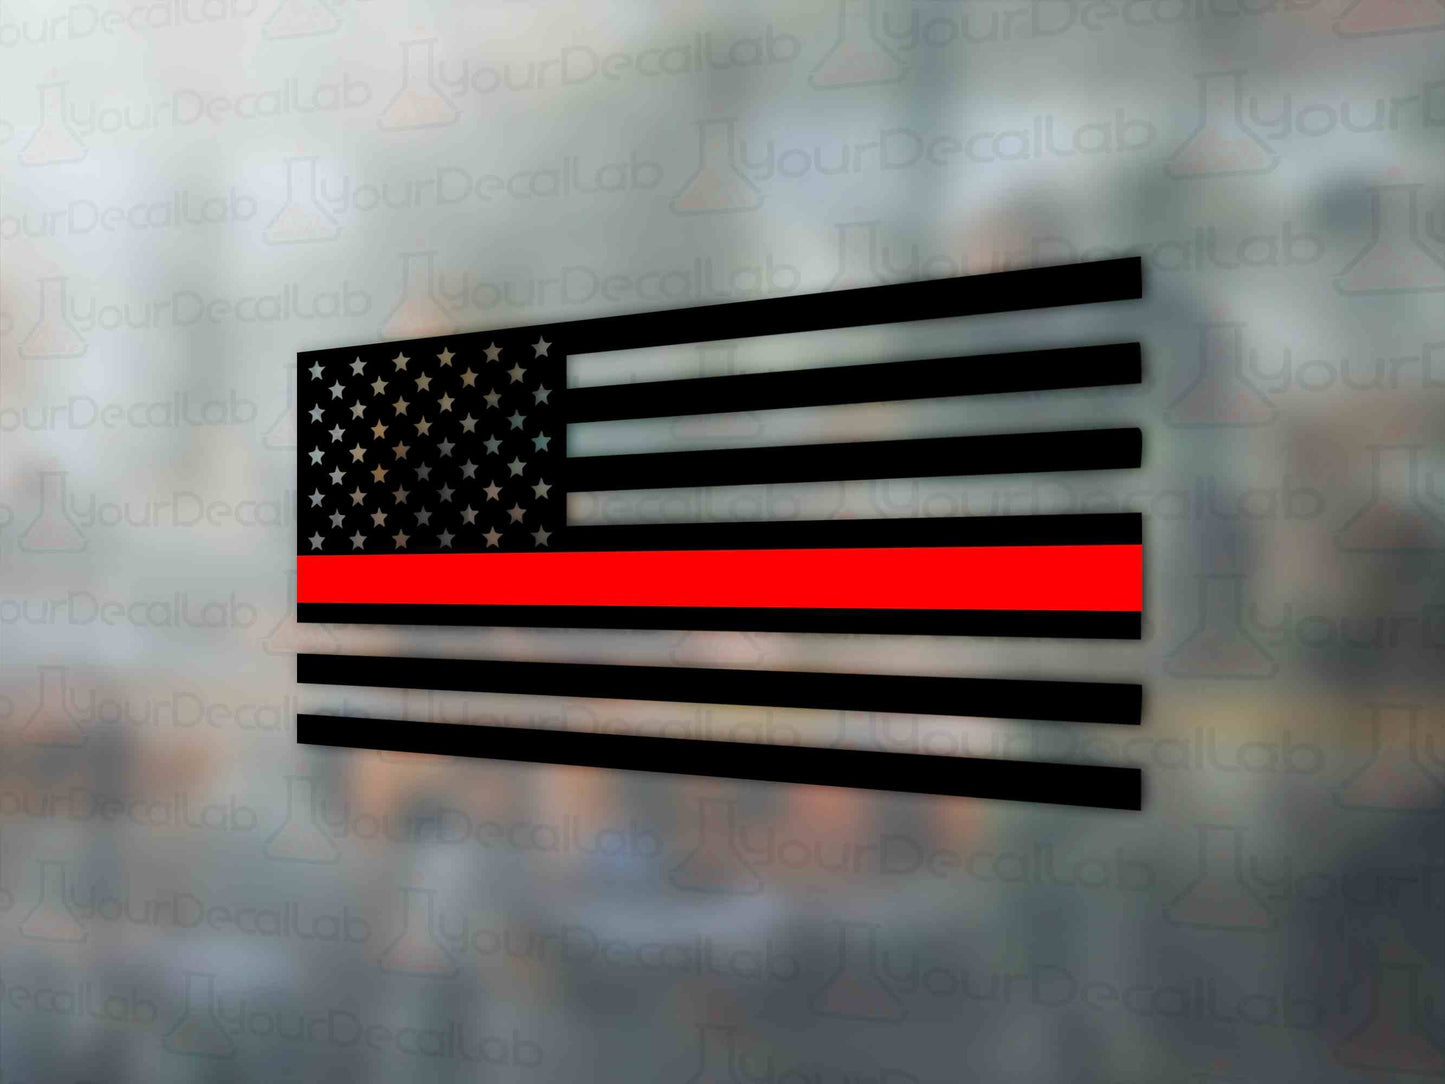 Red Line Decal American Flag - Many Colors & Sizes